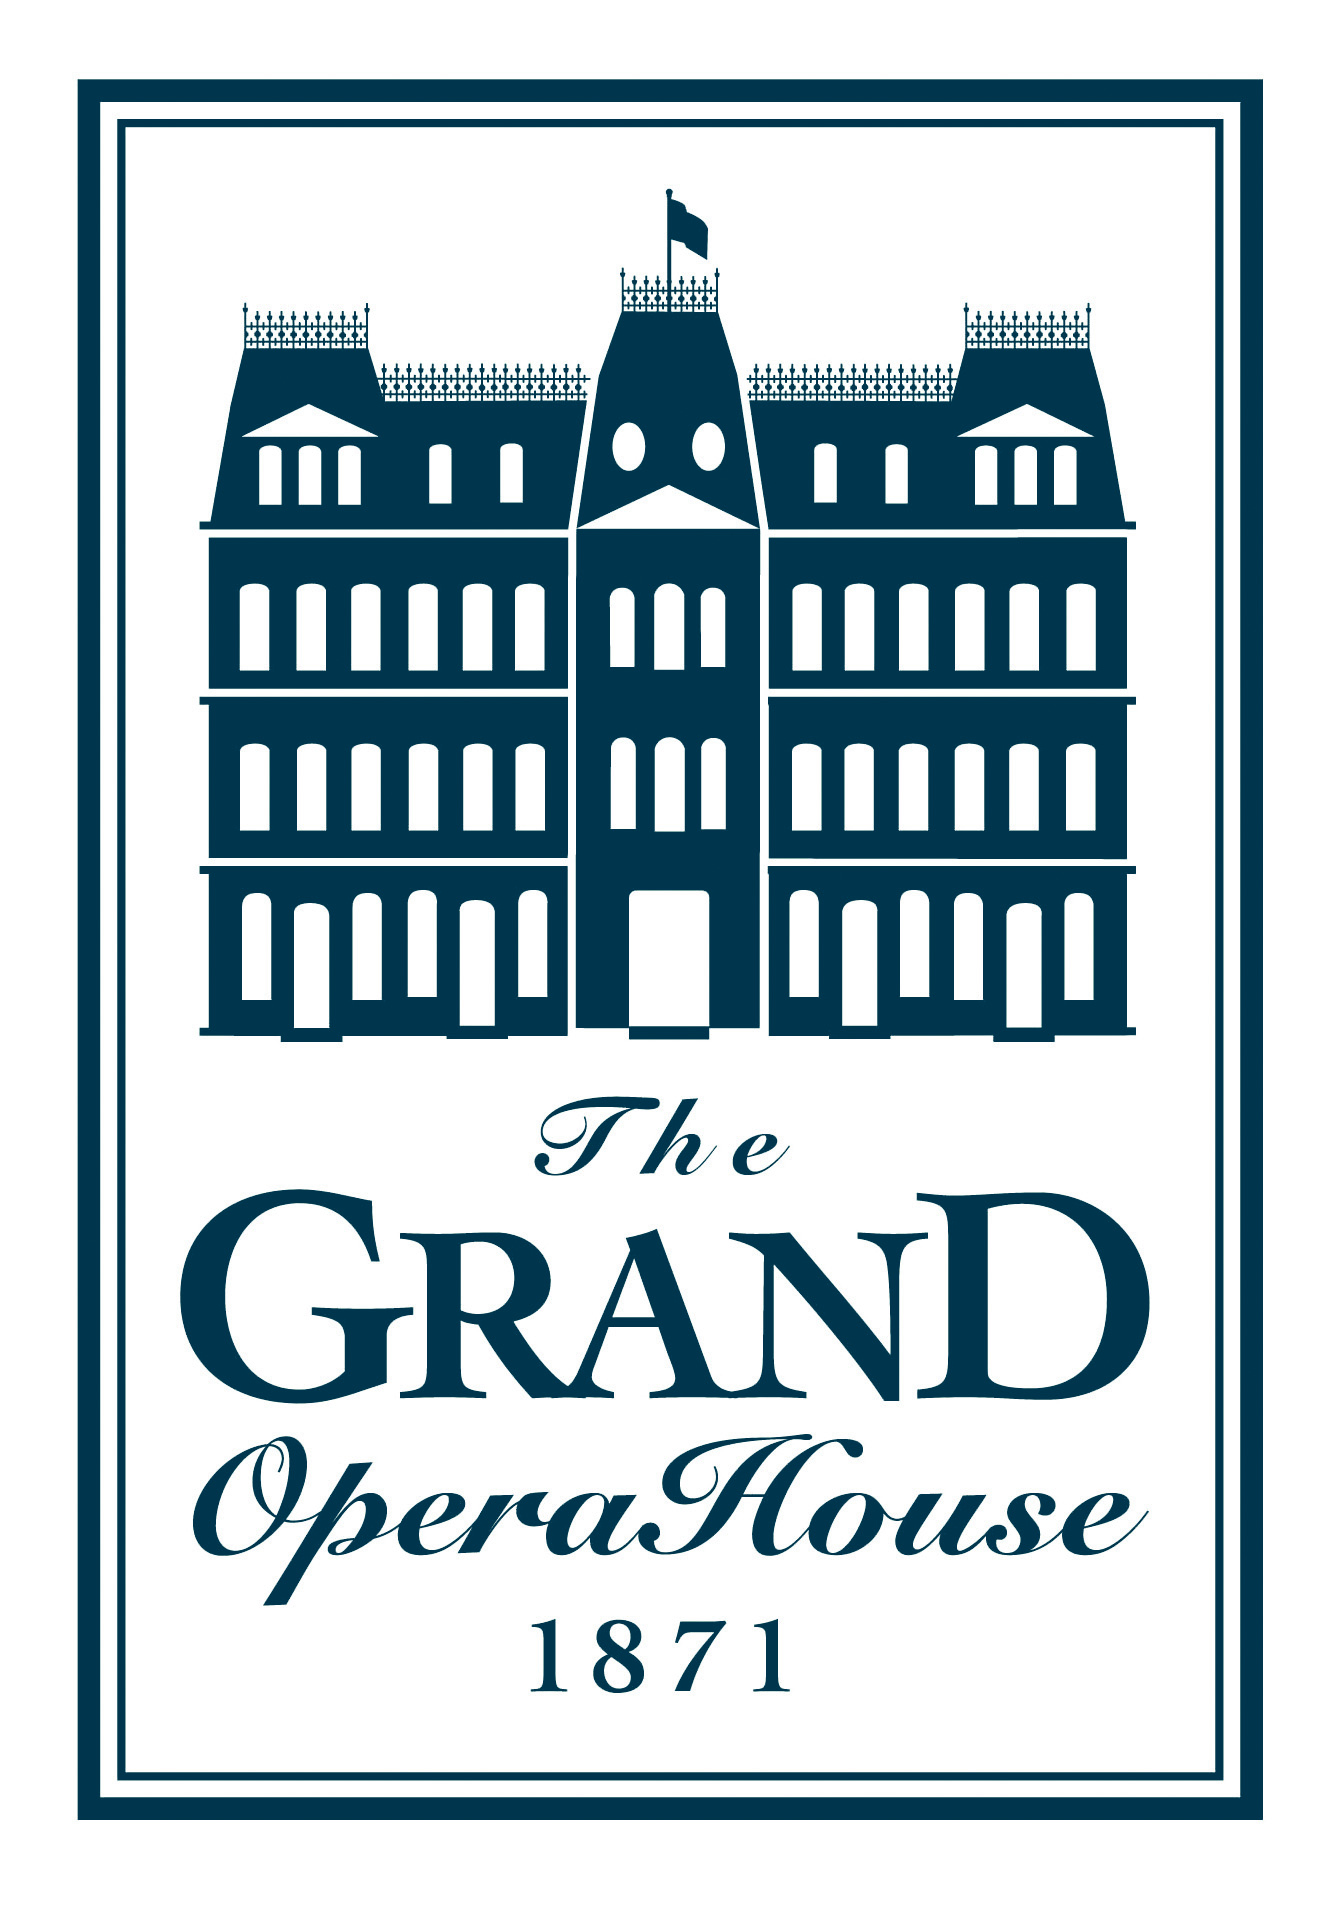 The Grand Opera House in Wilmington